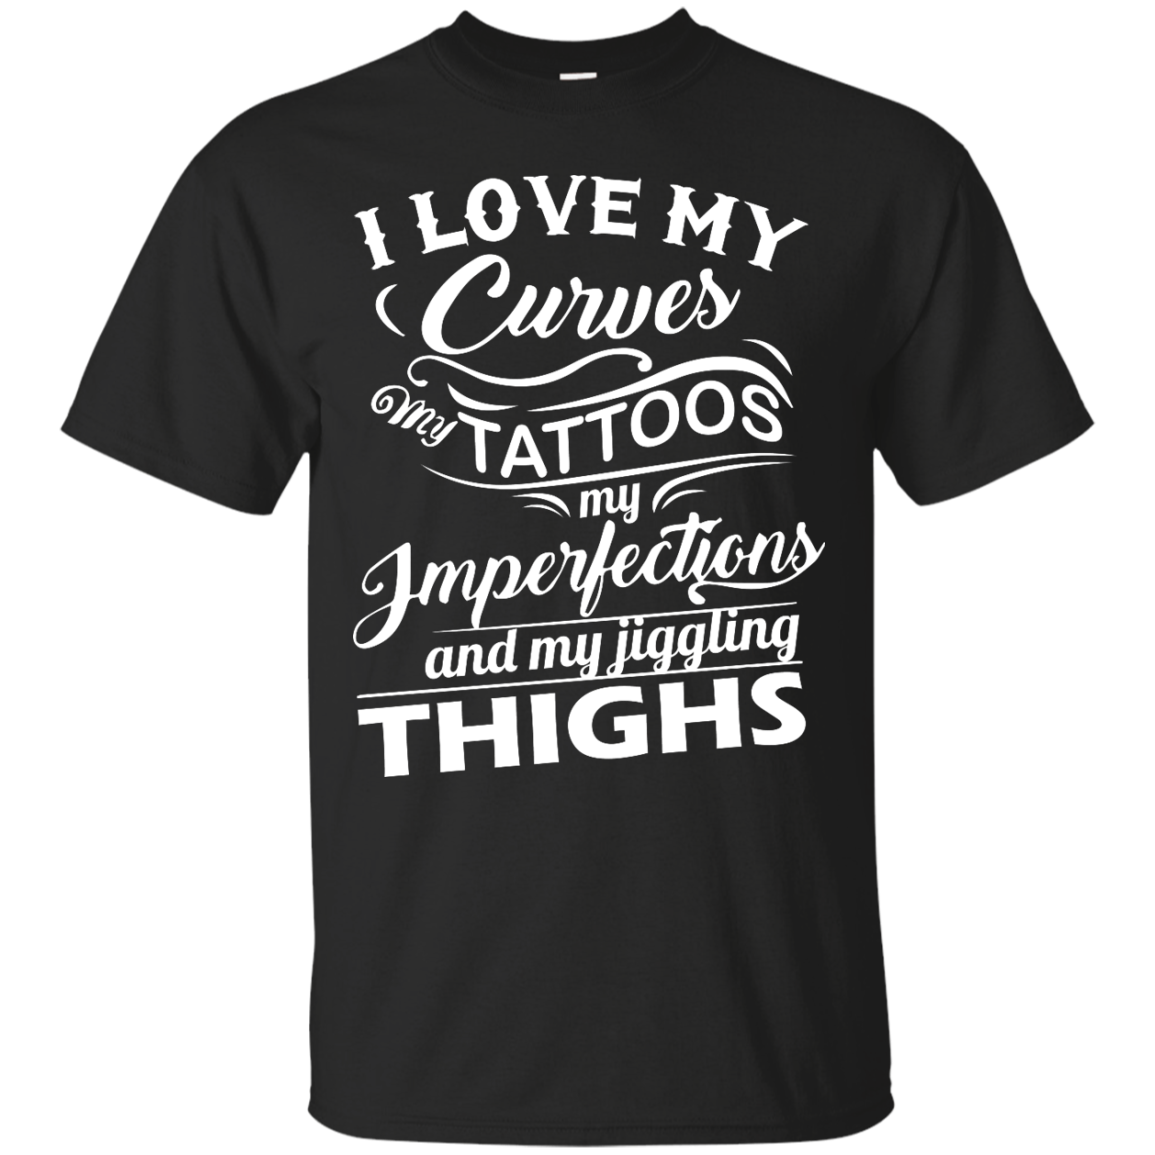 I Love My Curves My Tattoos My Imperfections shirt, tank, sweater